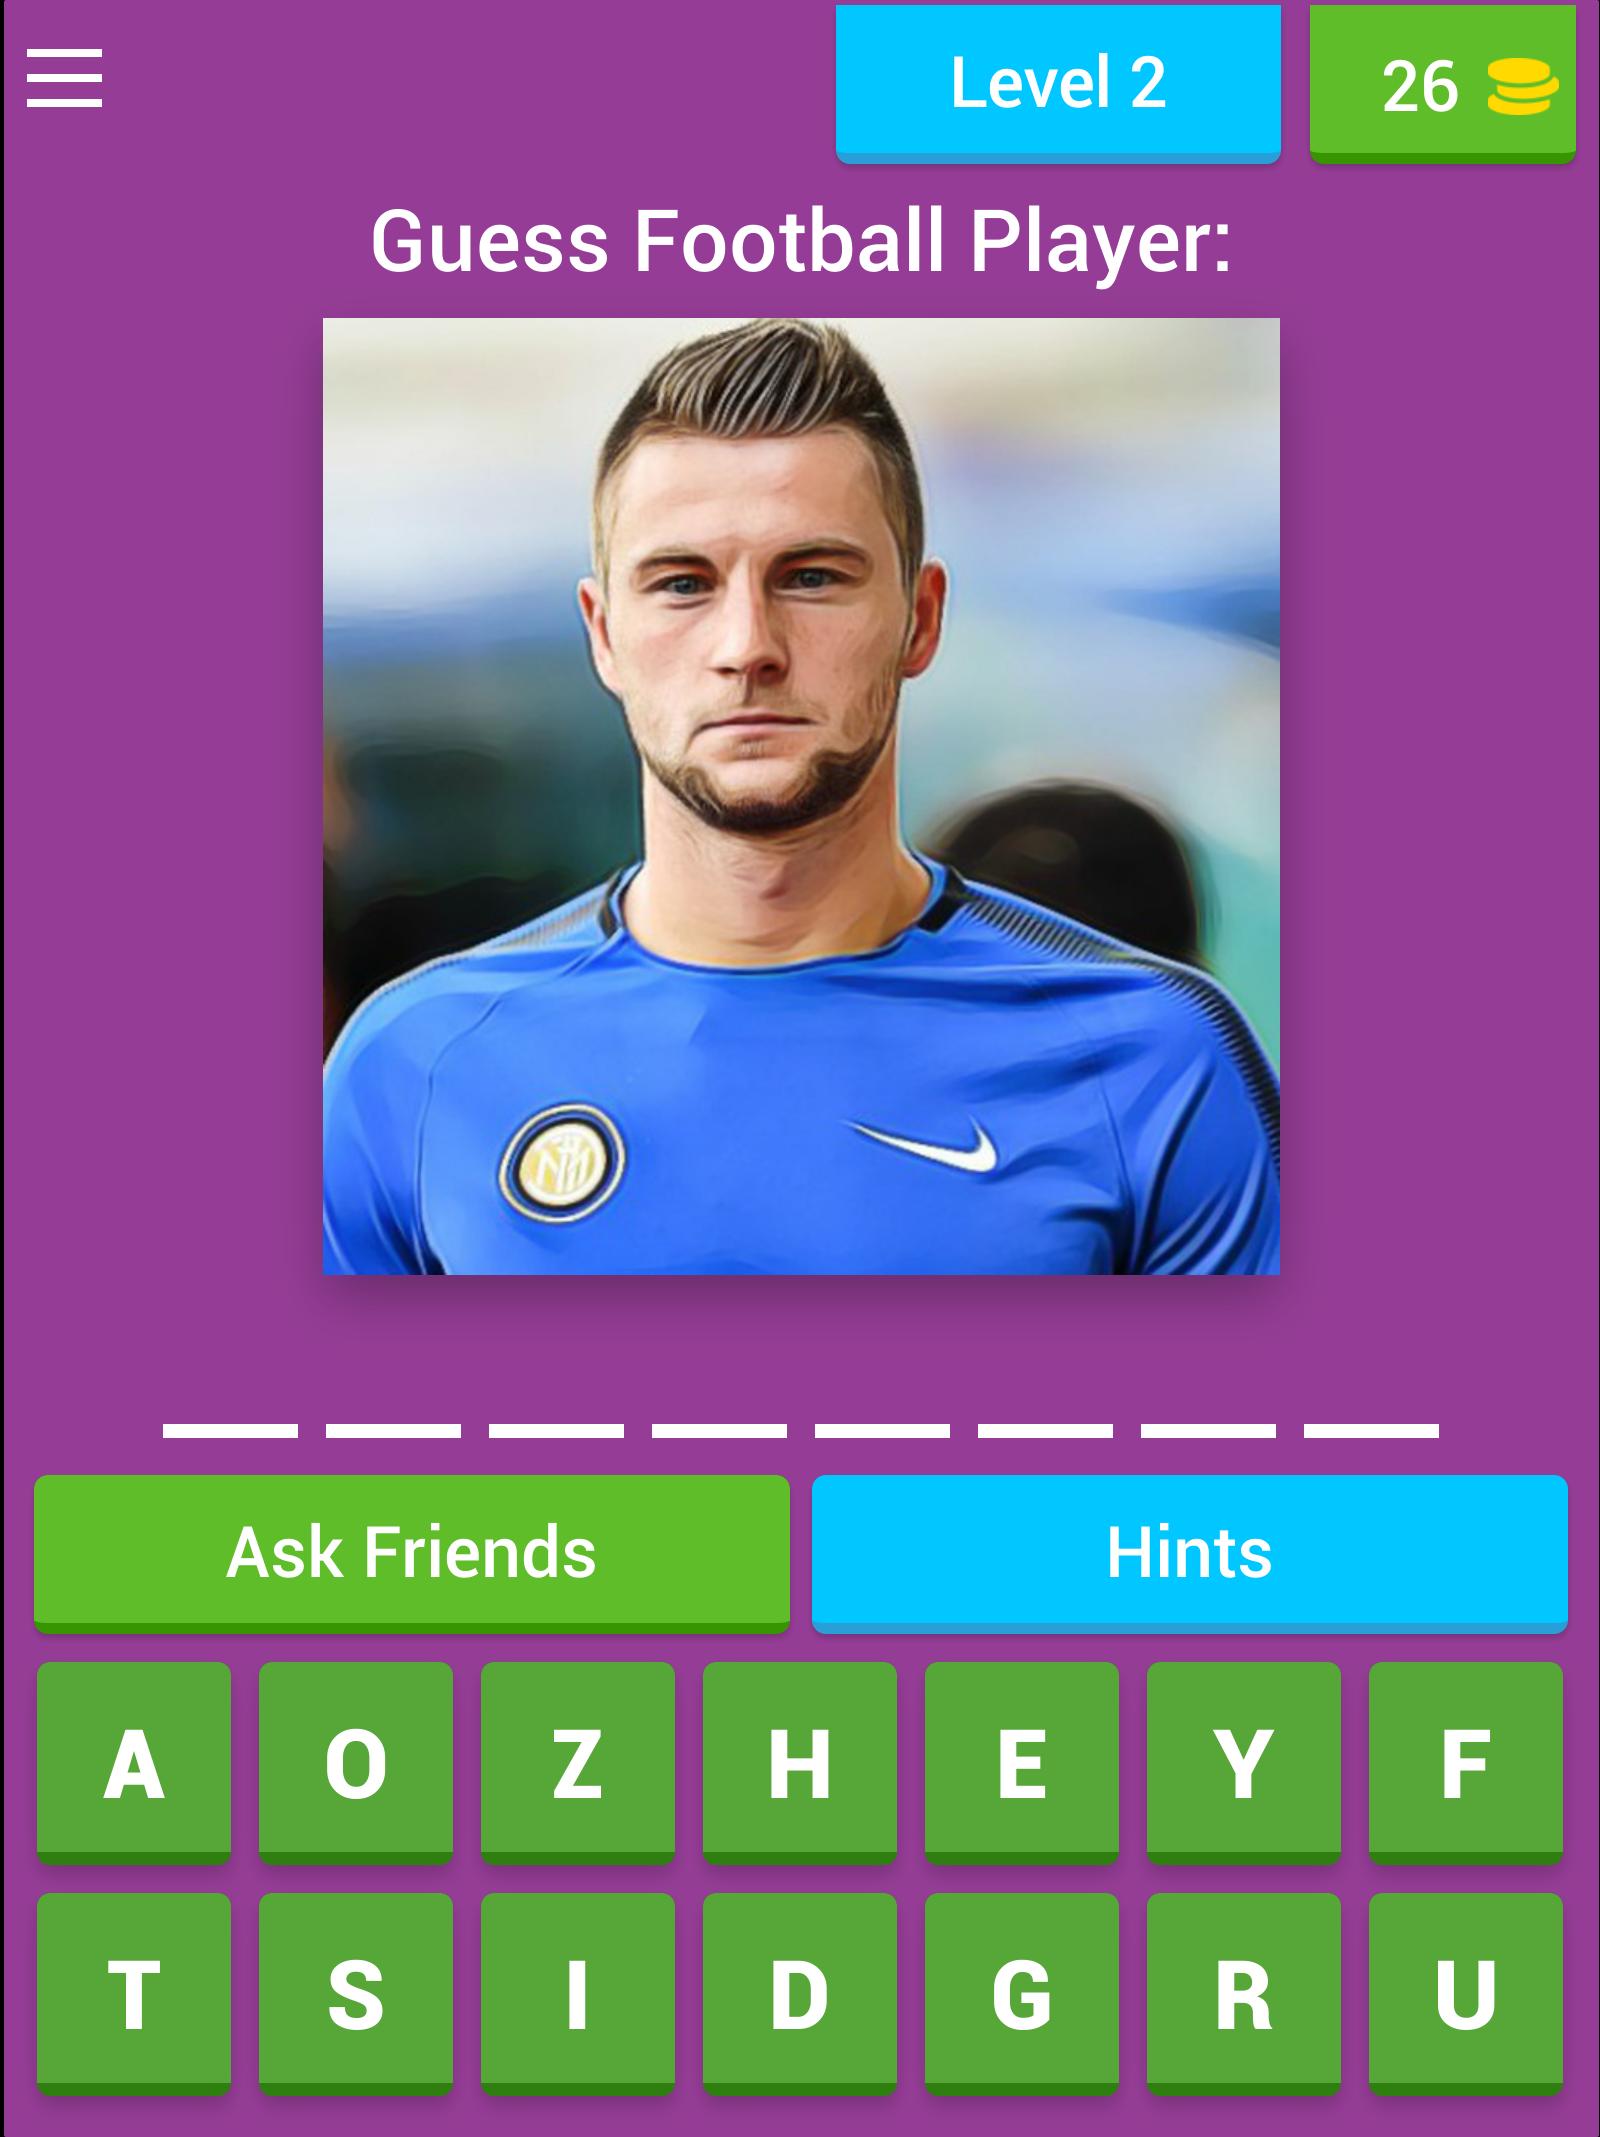 Guess Footballer WC Russia 2018 for Android - APK Download